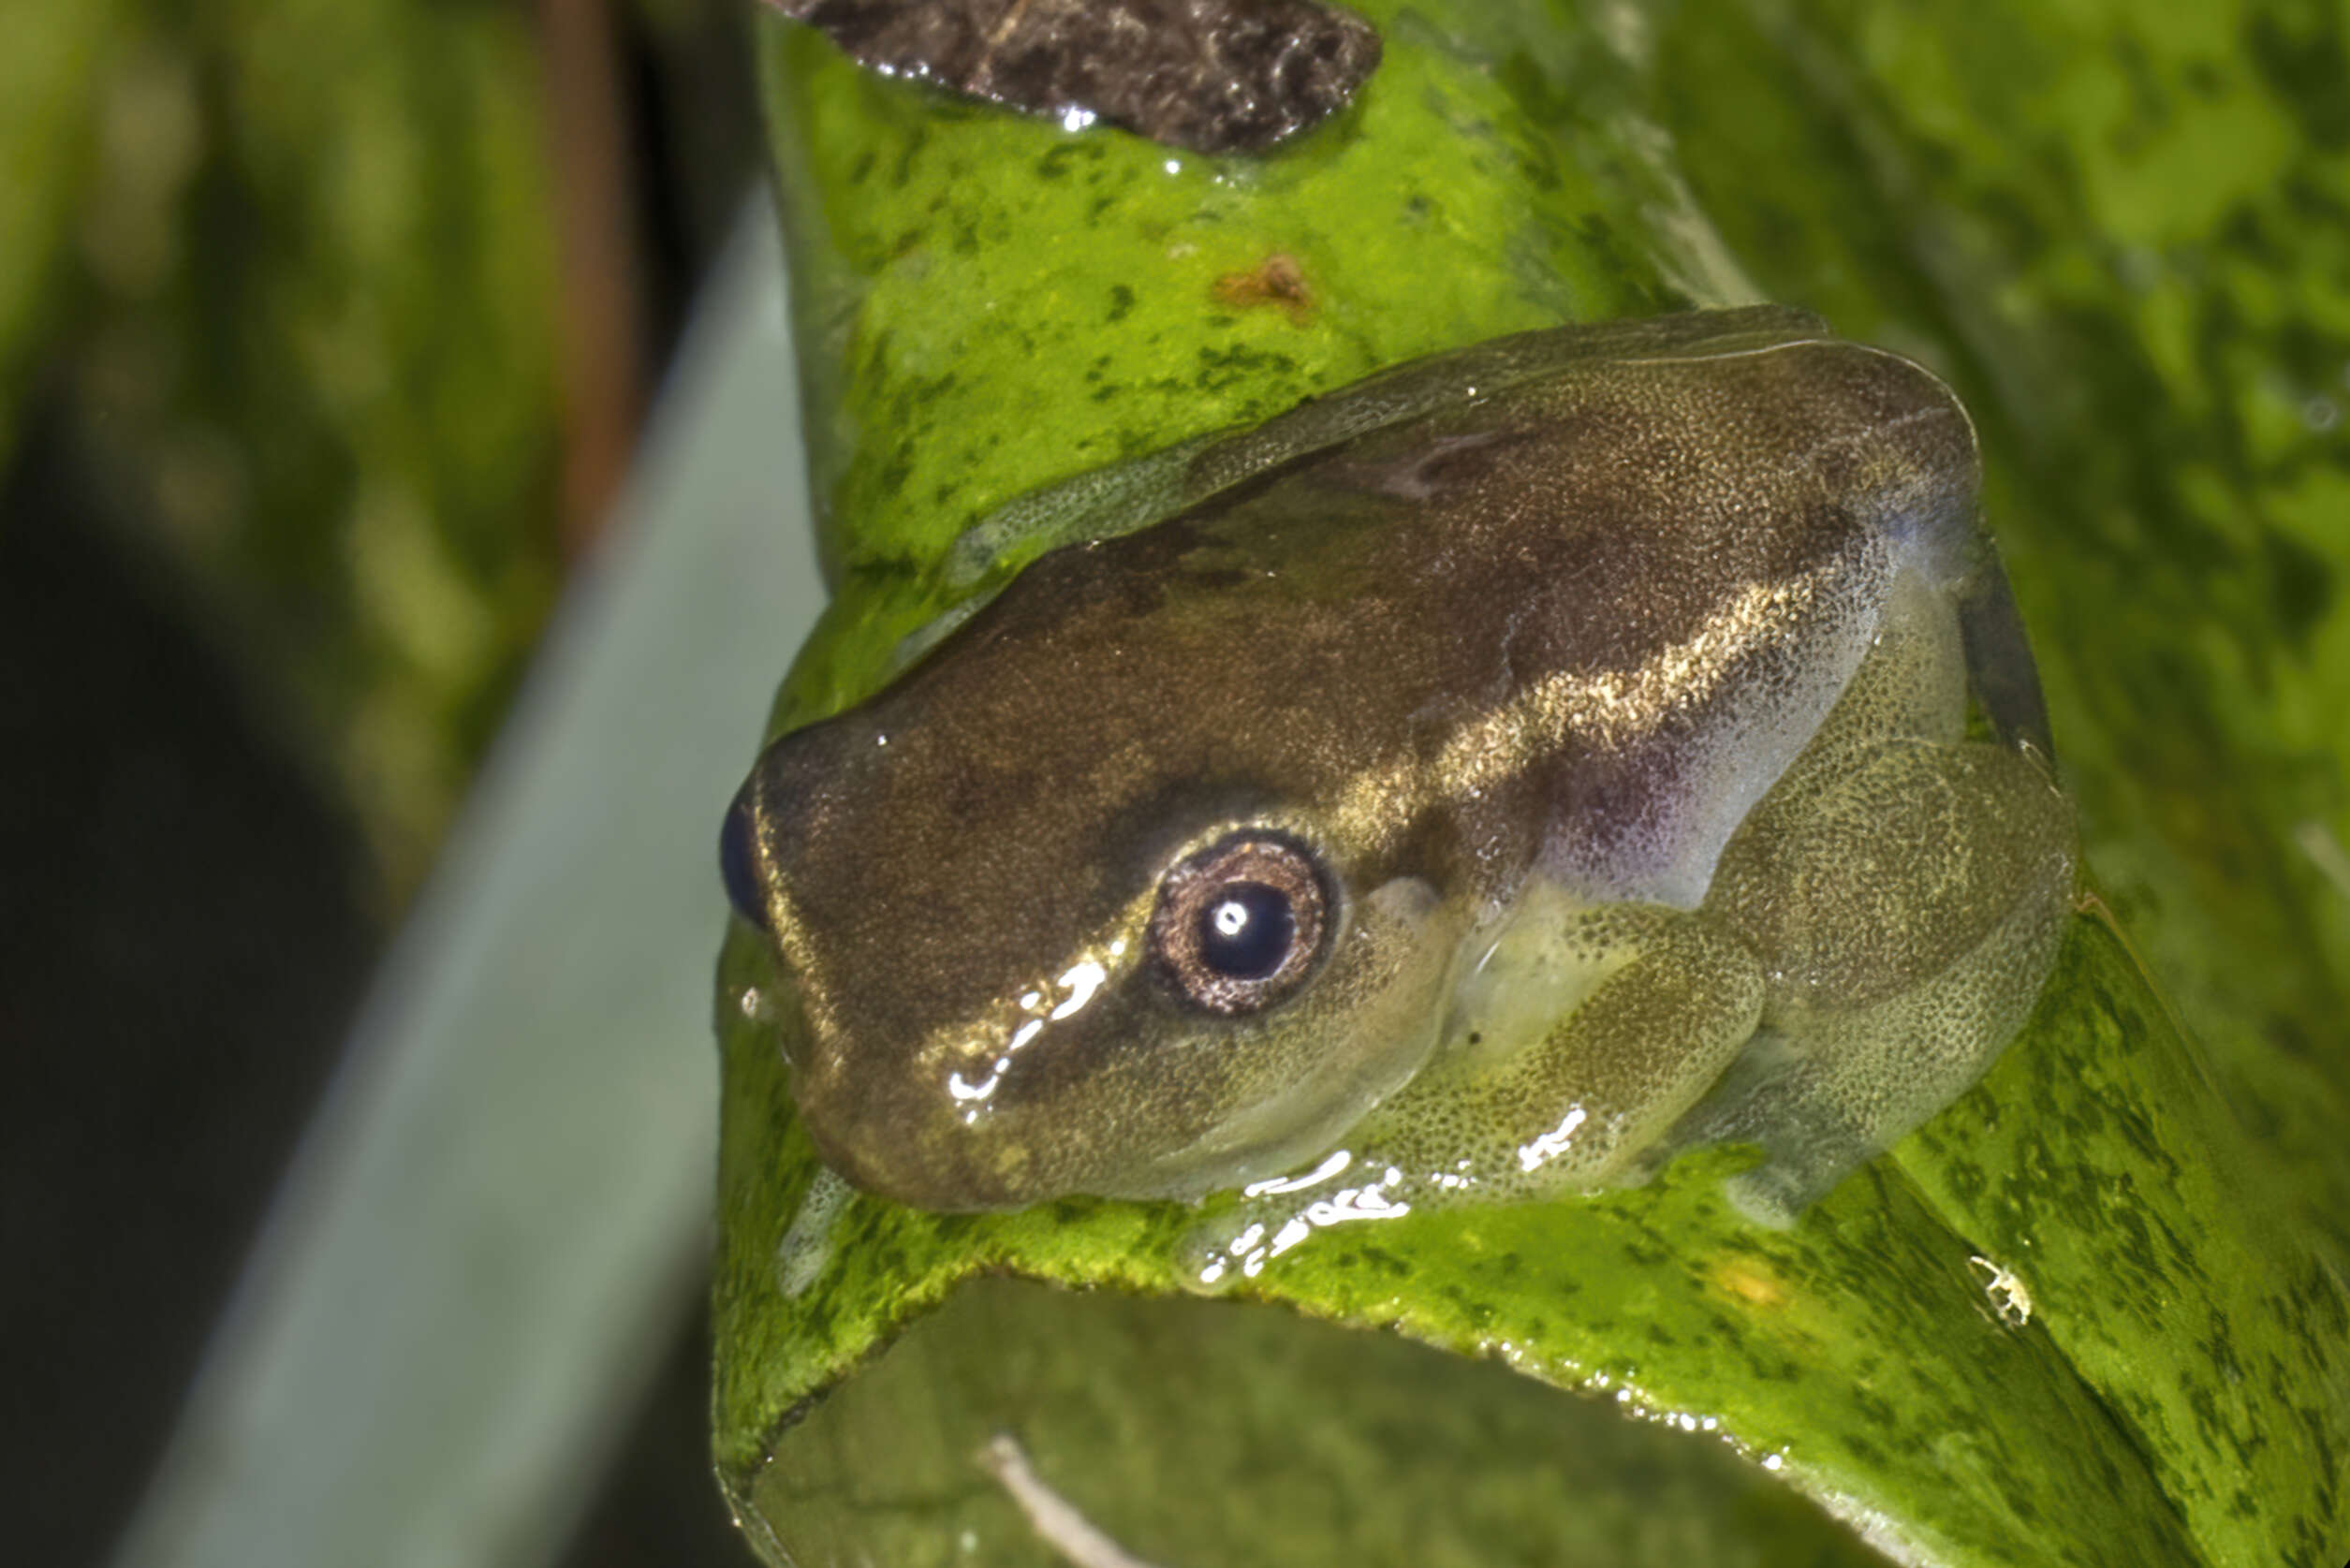 Image of Drewes' Reed Frog